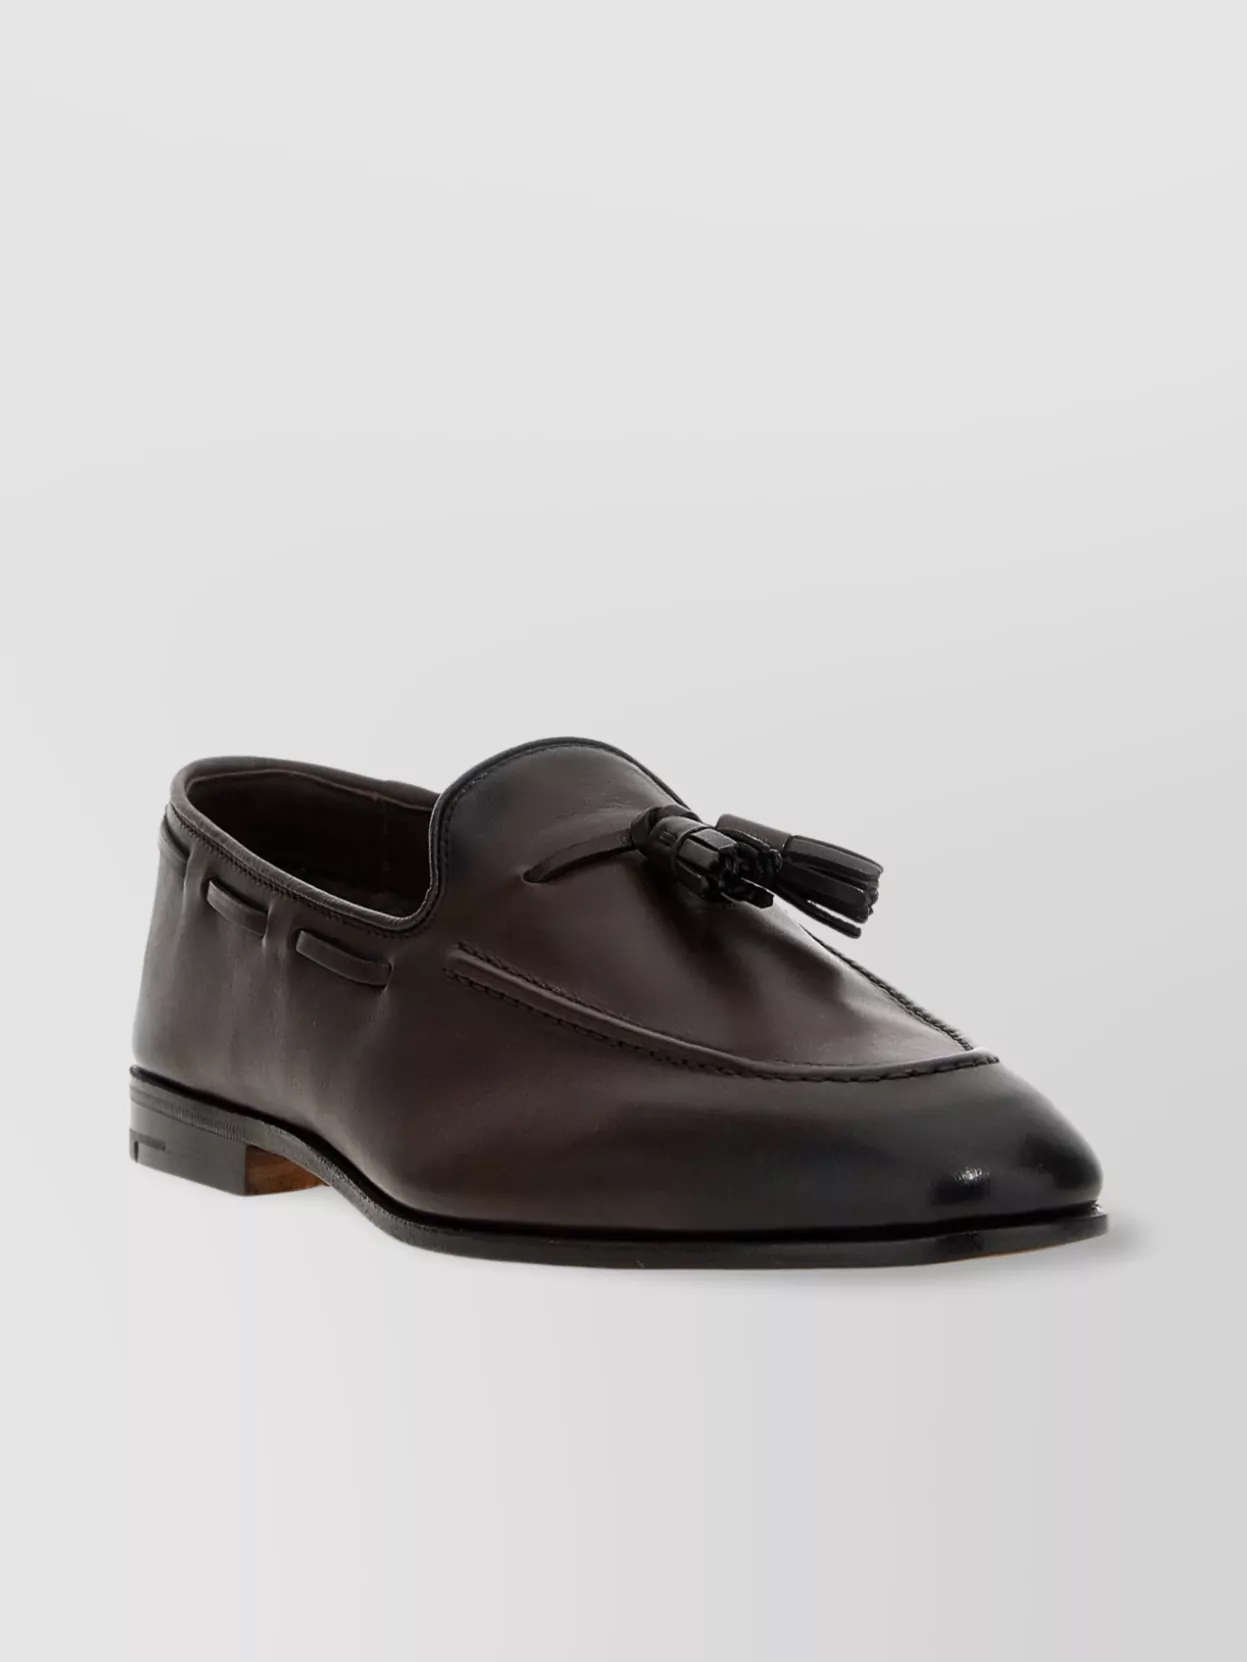 Church's Almond Toe Loafers Tassel Detail In Brown